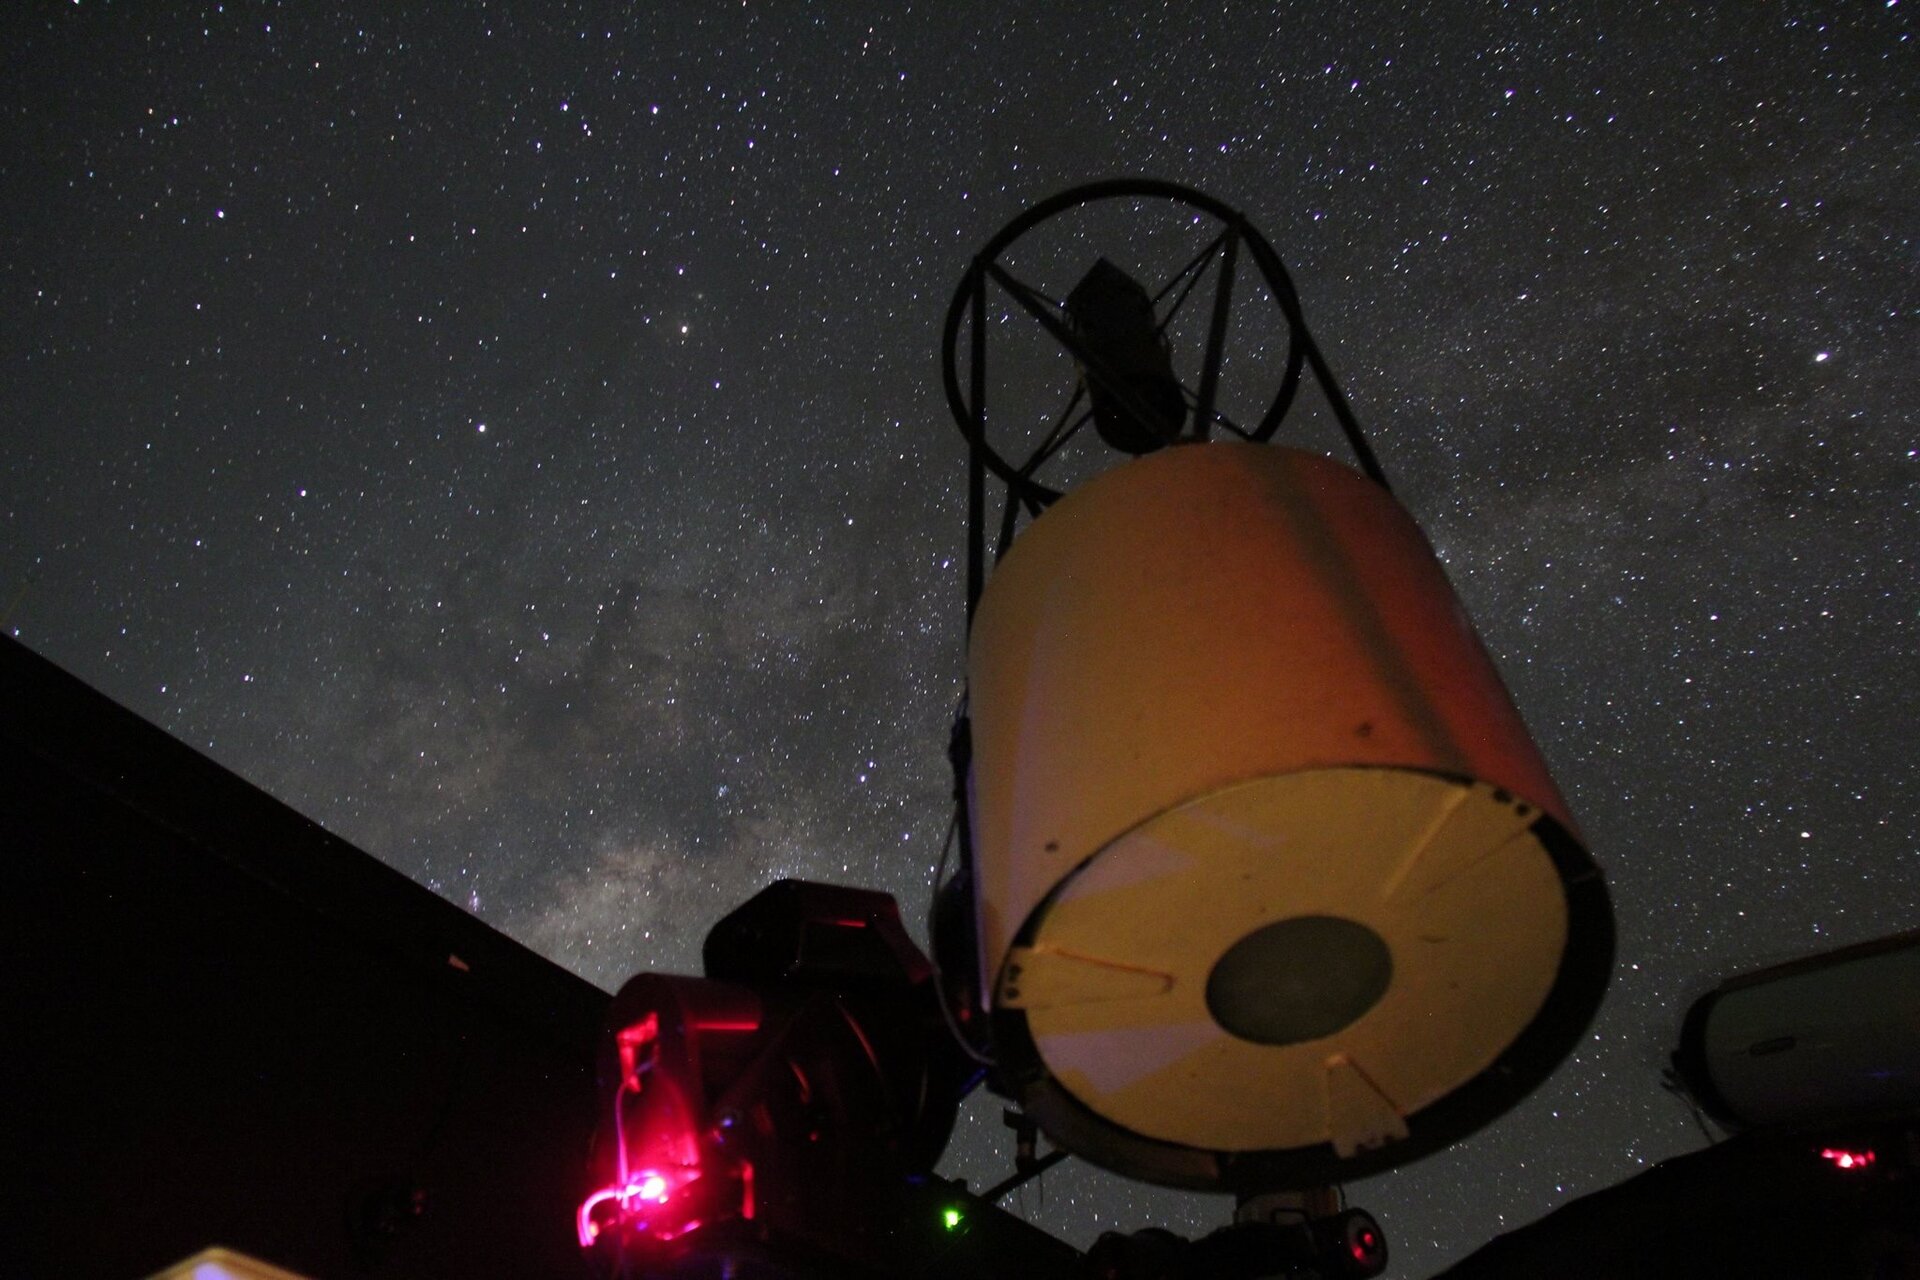 Southern Observatory for Near Earth Asteroids Research in Minas Gerais, Brazil